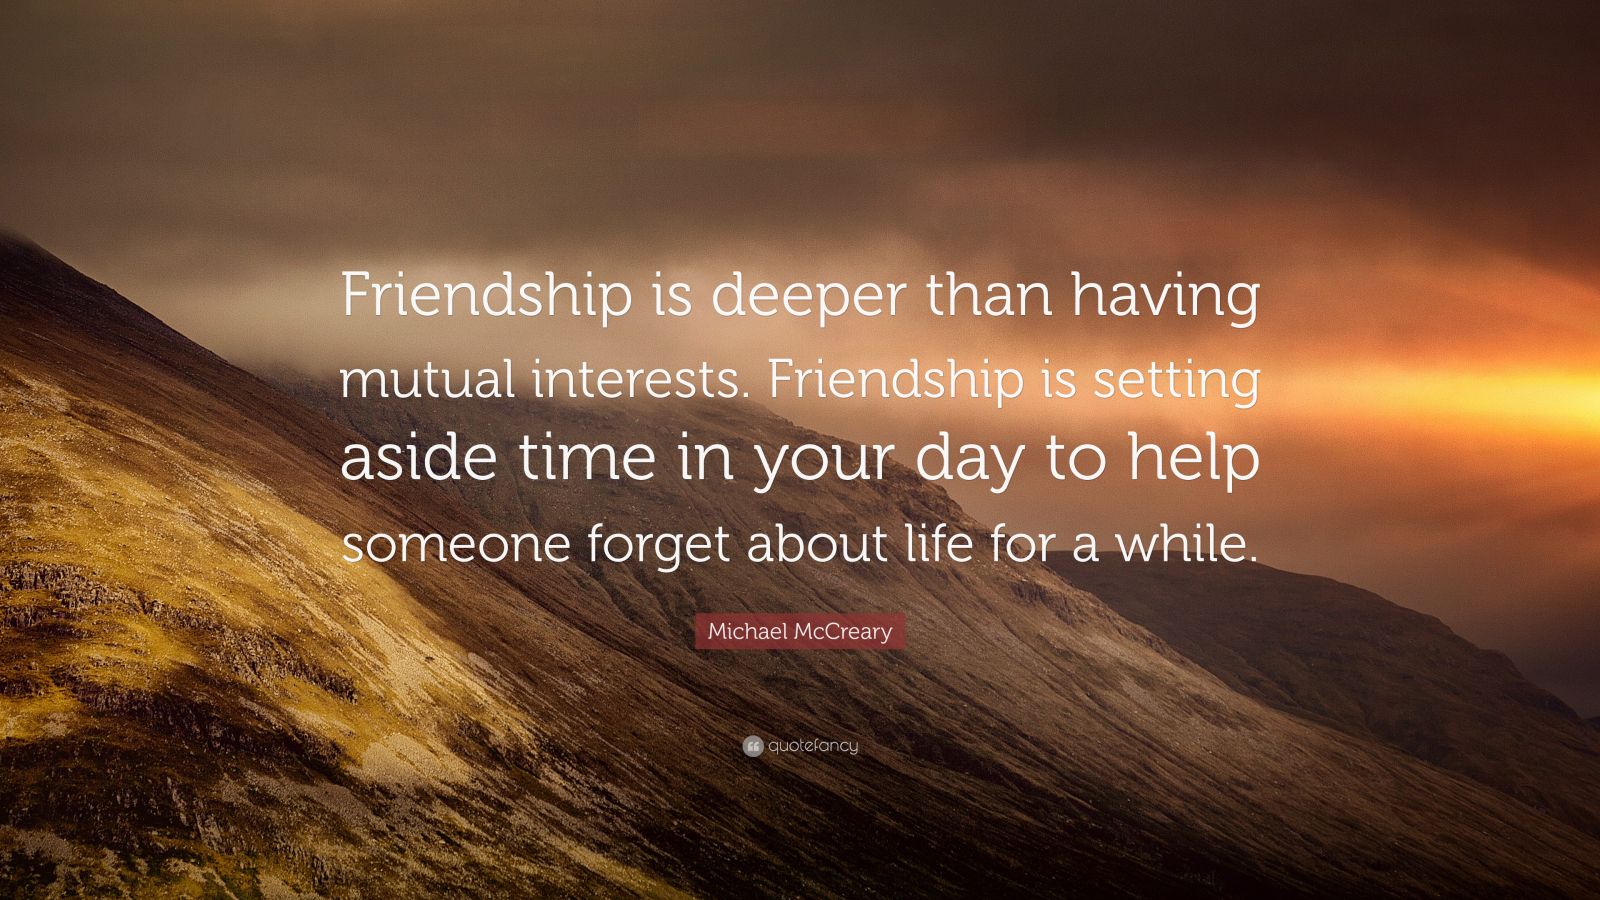 Michael McCreary Quote: “Friendship is deeper than having mutual ...